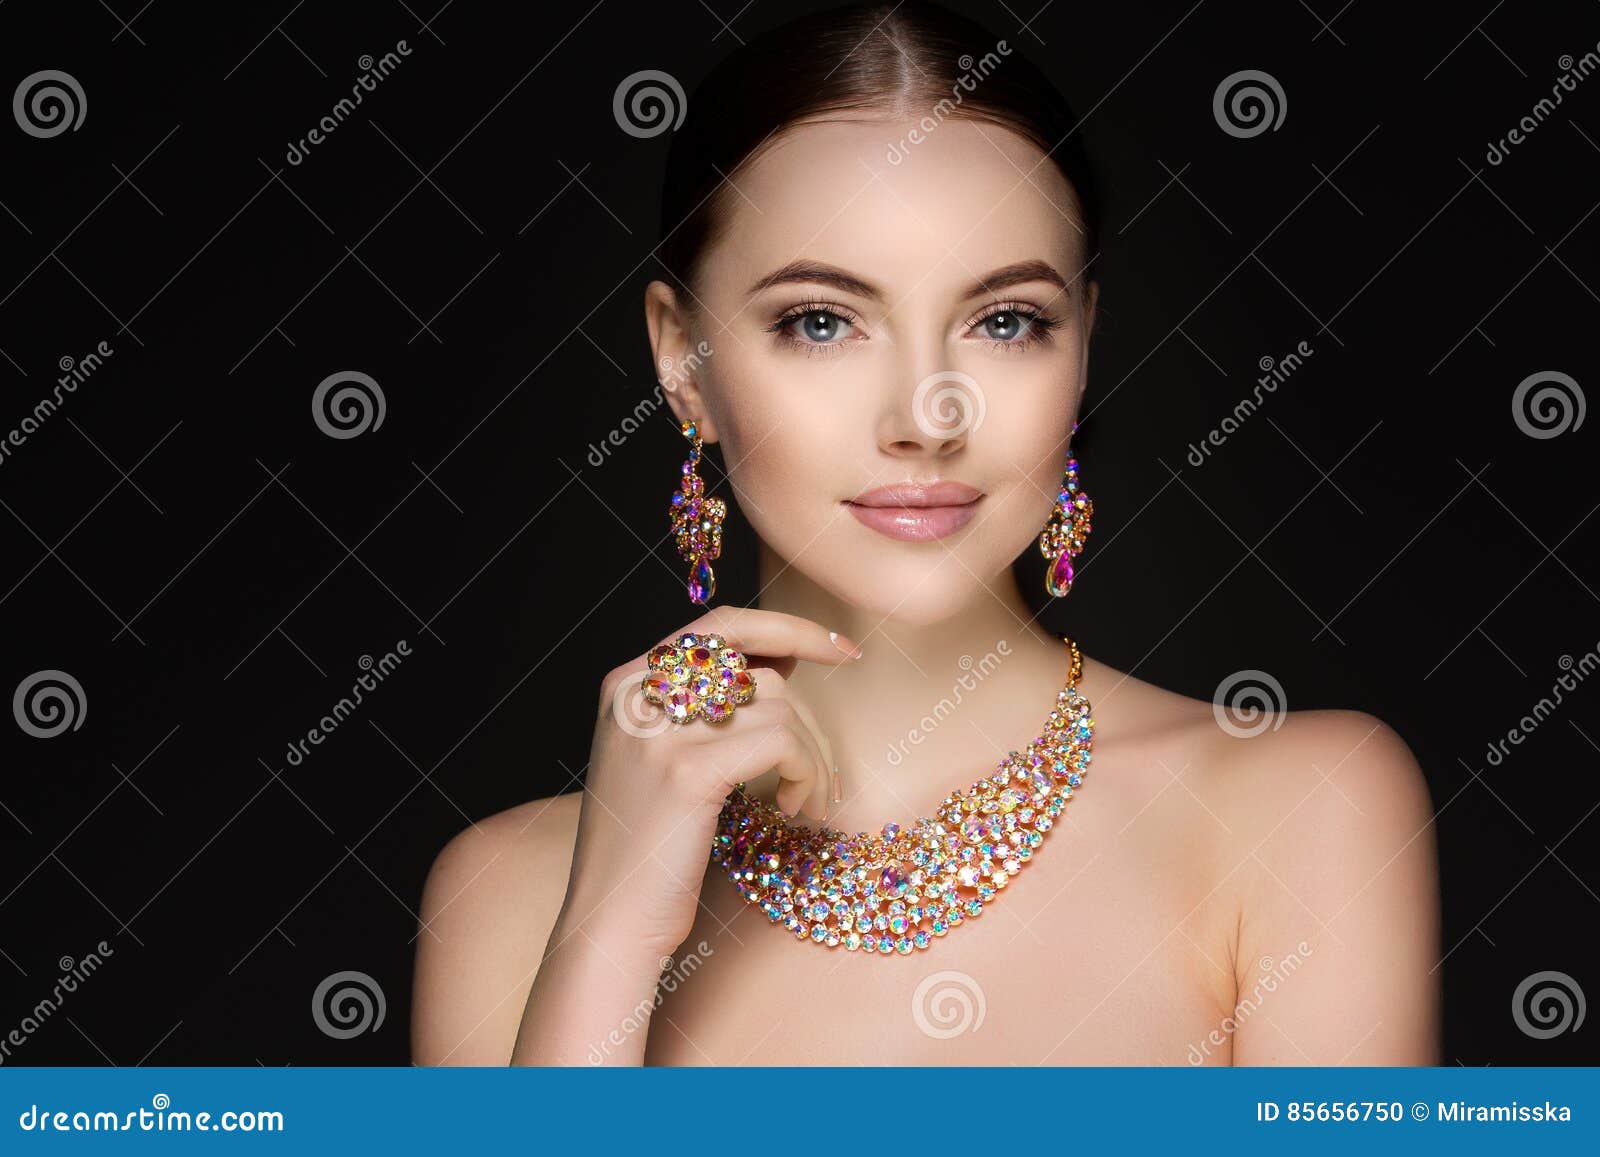 beautiful woman in a necklace, earrings and ring. model in jewel